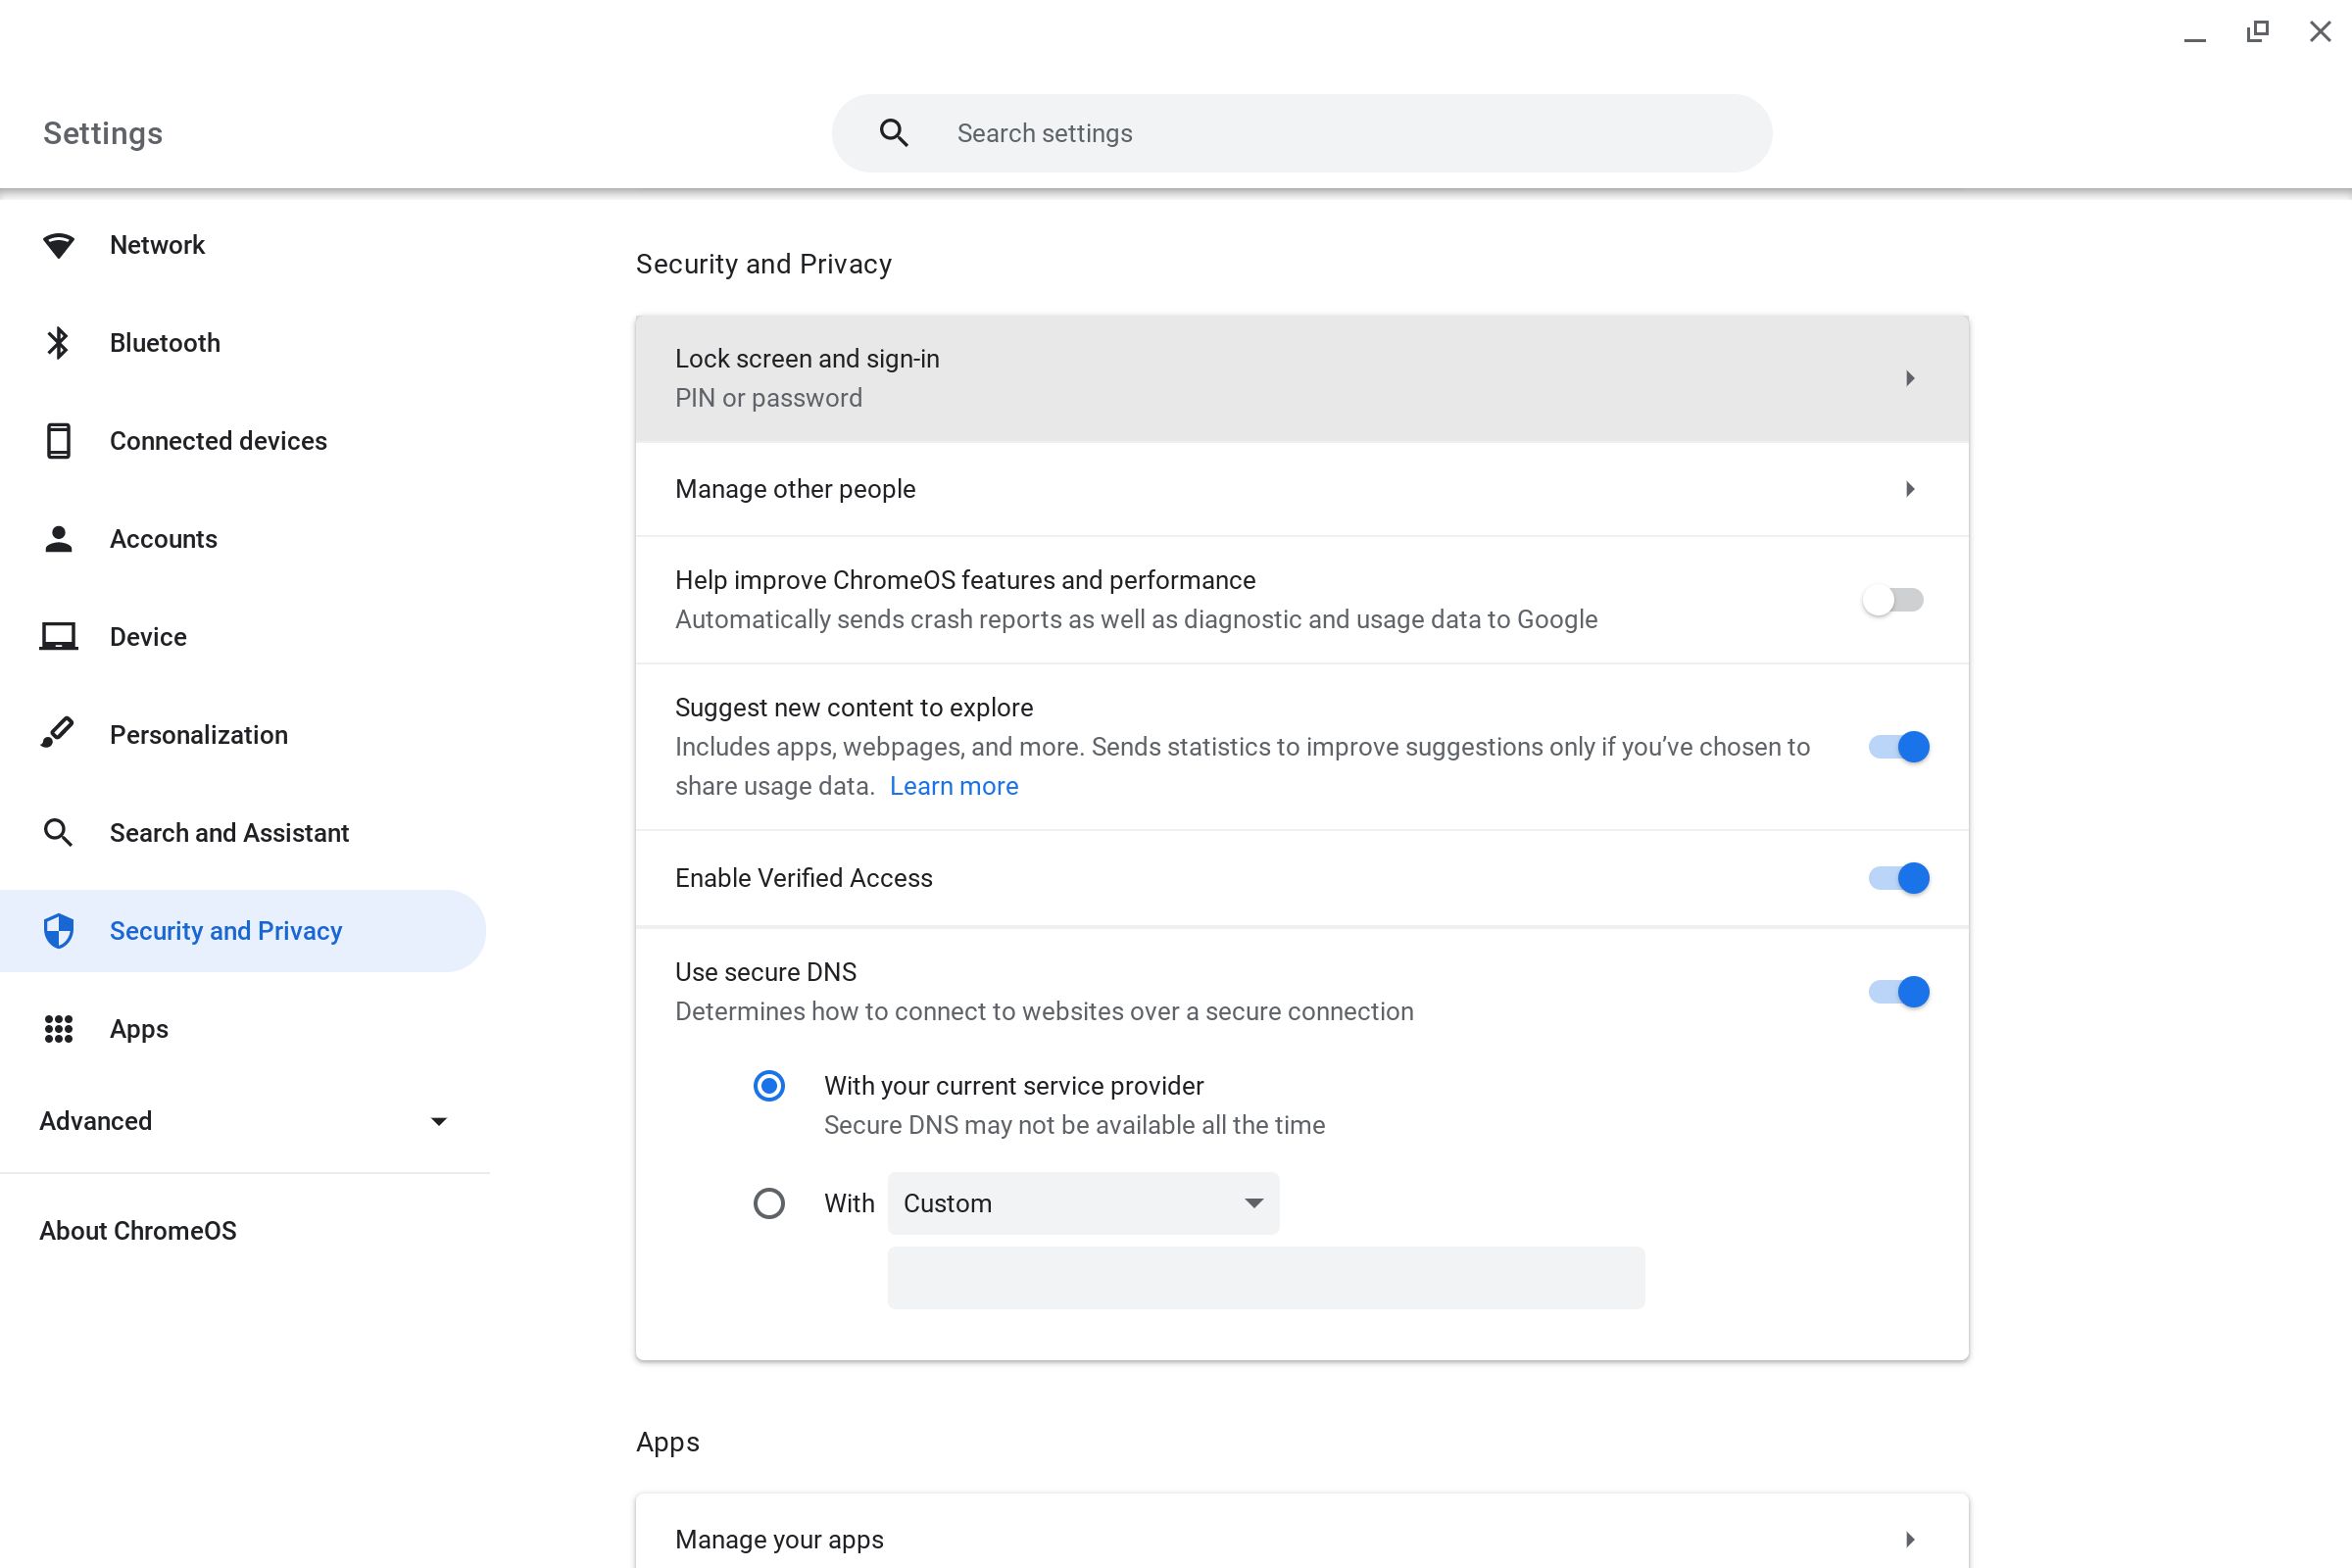 The Security and Privacy section in the Chromebook Settings app.